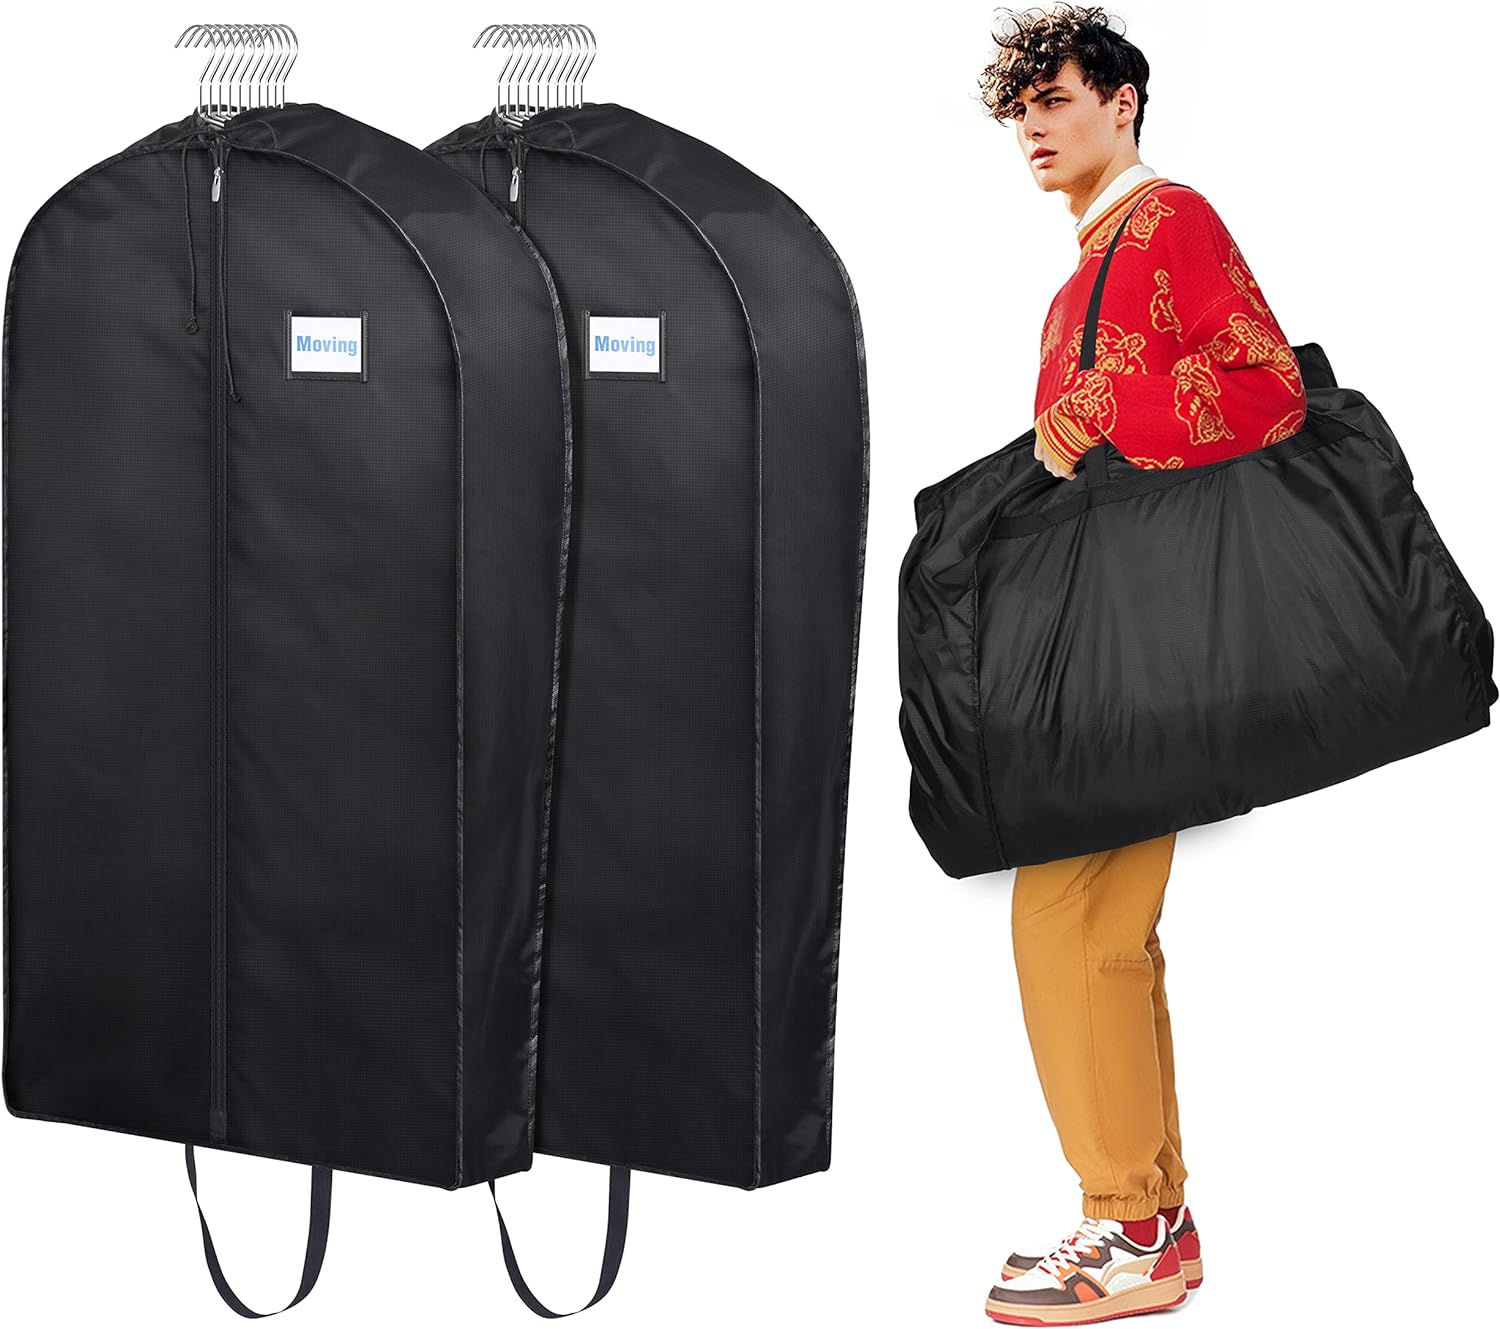 MATEIN Garment Bag for Travel, Large Carry on Garment Bags with Strap for  Business, Waterproof Hanging Suit Luggage Bag for Men Women, Wrinkle Free